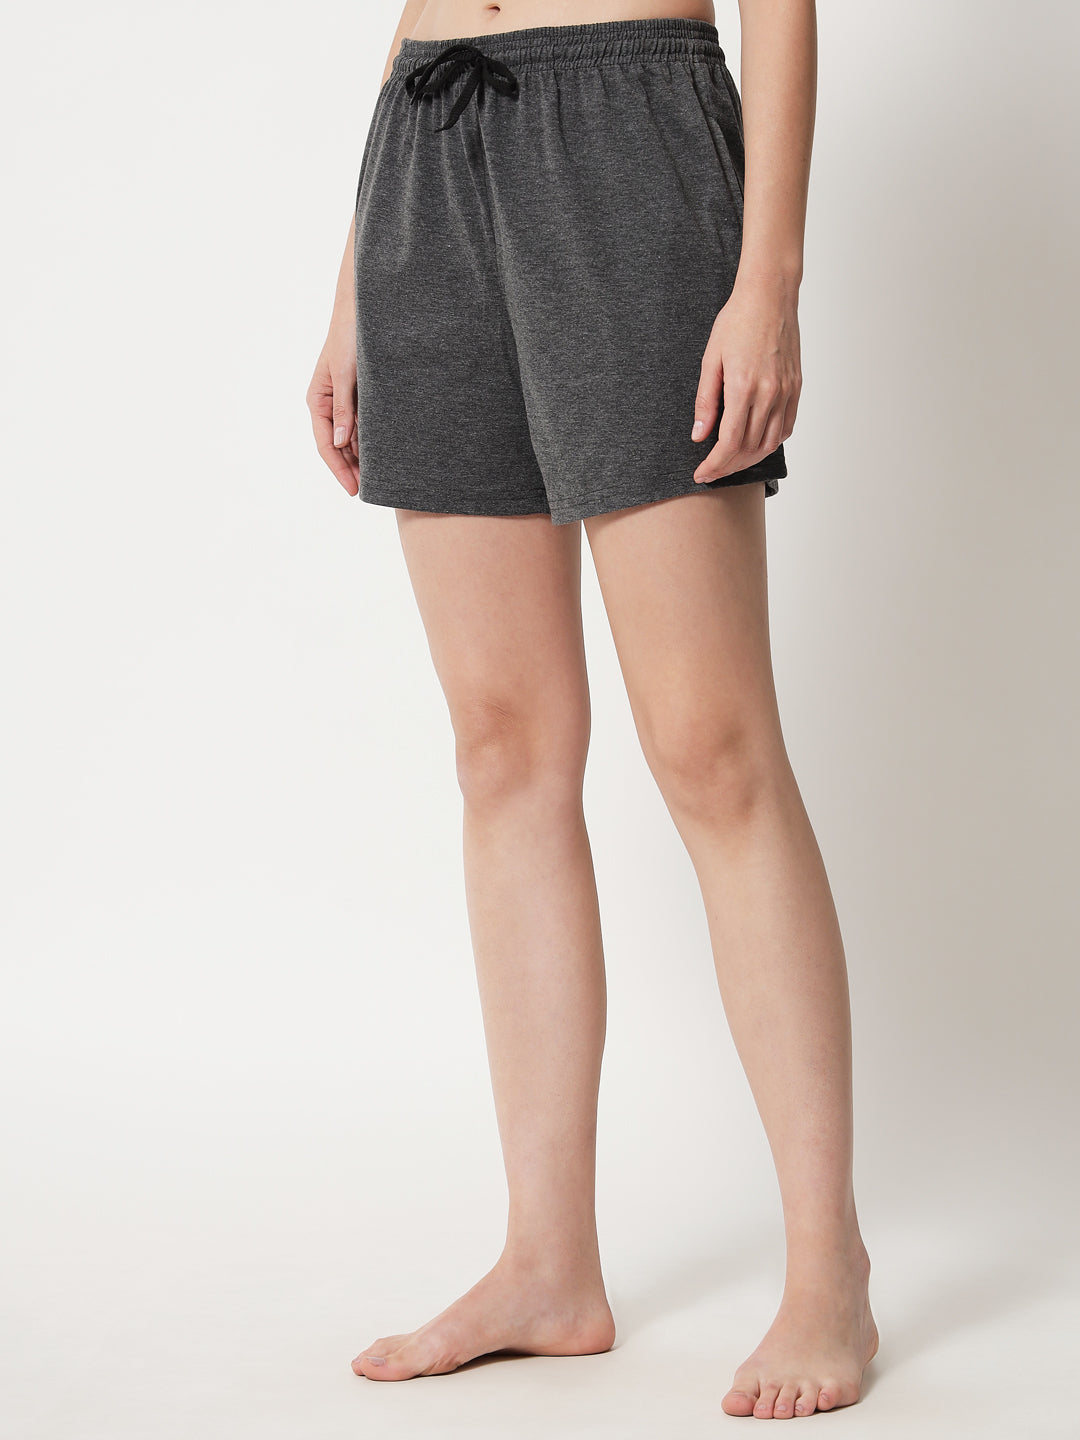 Charcoal Grey Color Solid Shorts